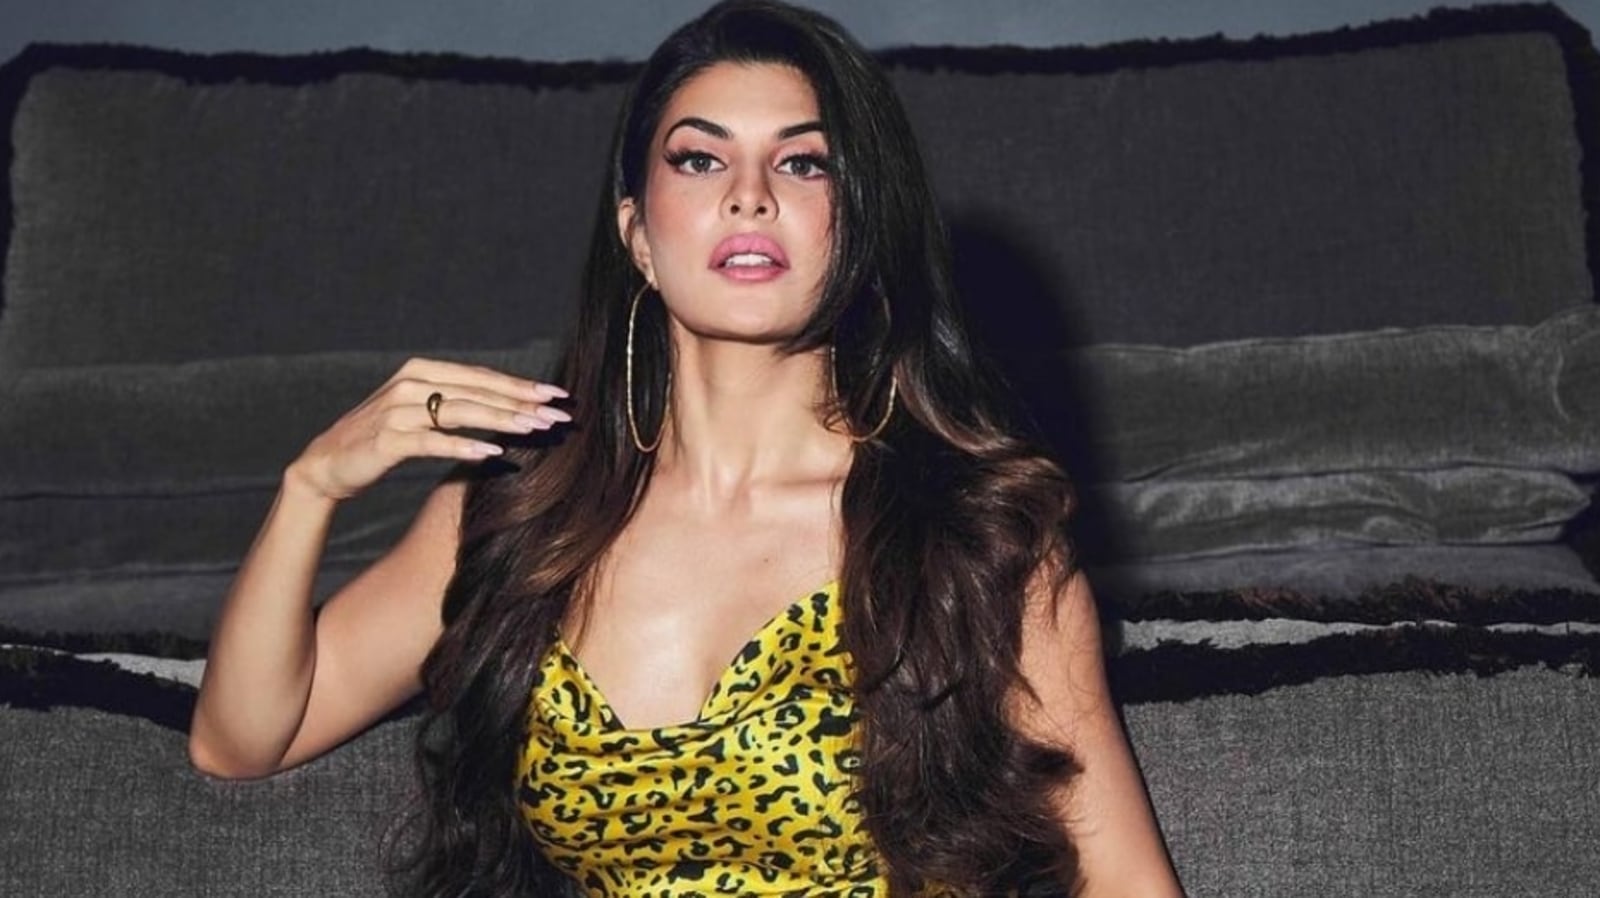 jacqueline-fernandez-says-negative-reports-about-her-are-upsetting-what-did-i-do-wrong